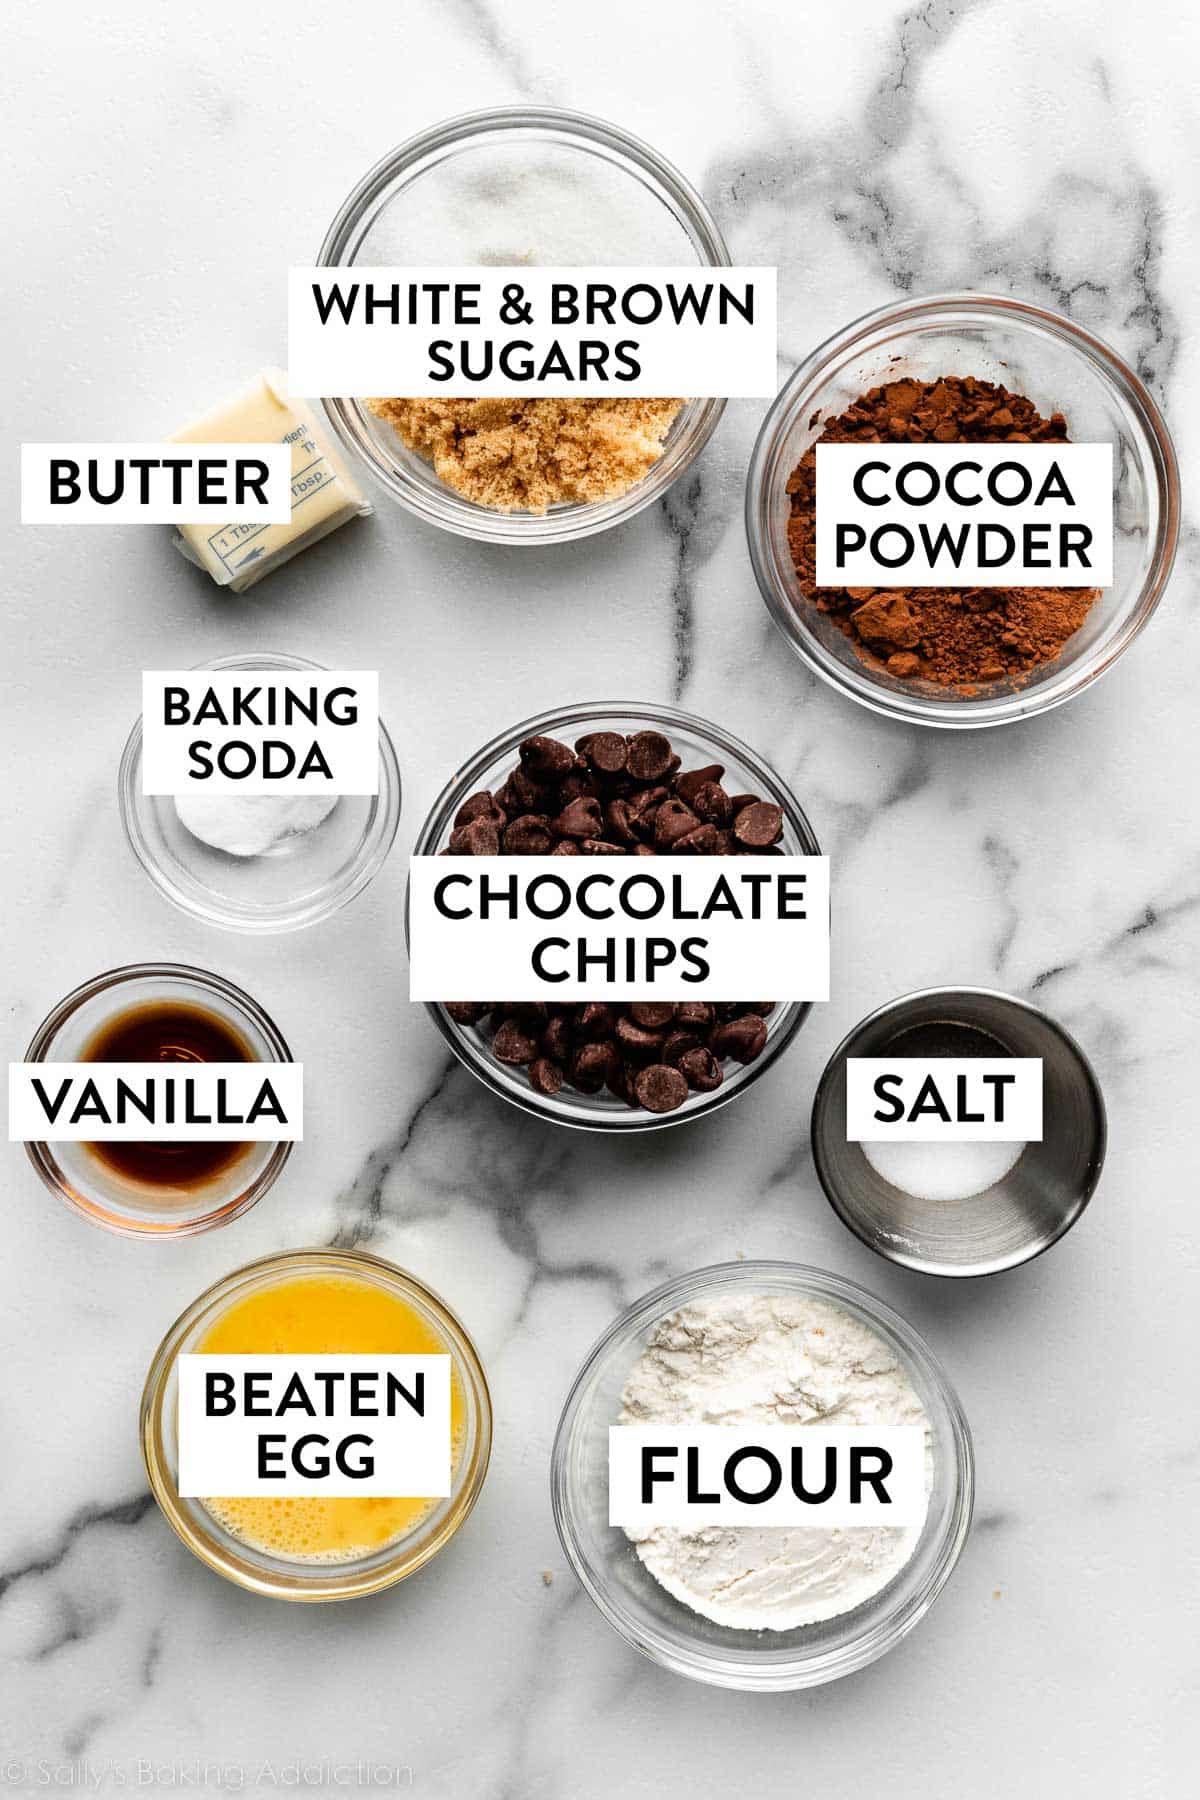 bowls of ingredients on marble counter including cocoa powder, salt, flour, chocolate chips, beaten egg, sugars, and more.